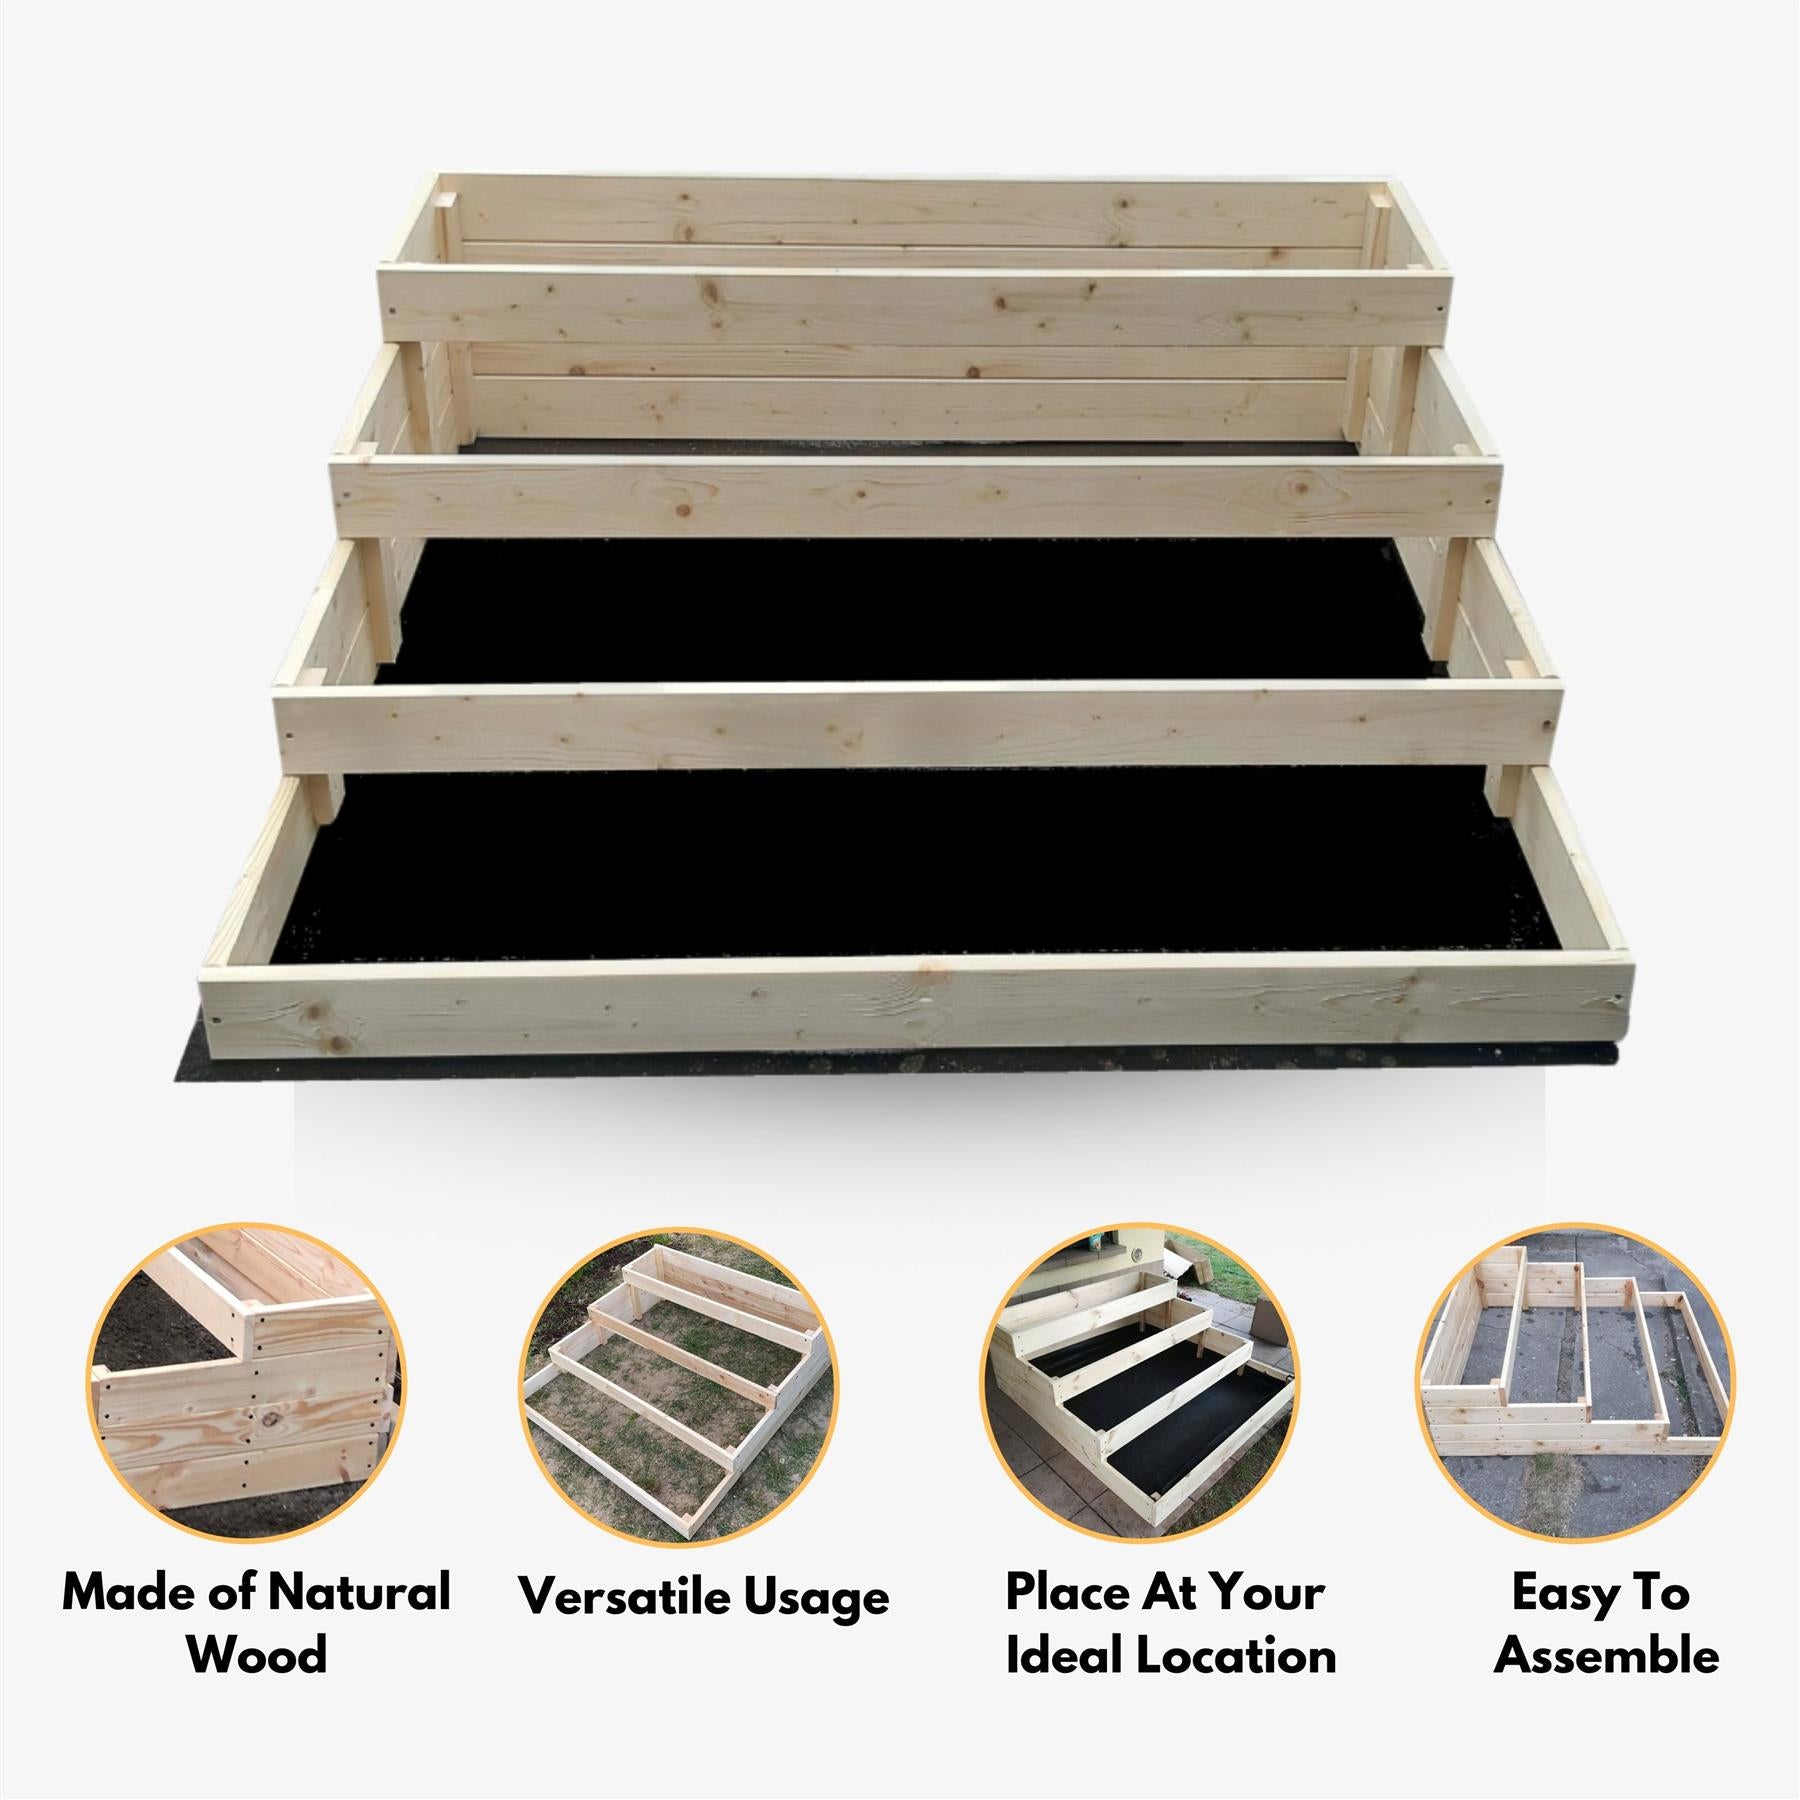 4 Tiered Raised Beds For Garden - Large Wooden Planters - Organic Garden Bed